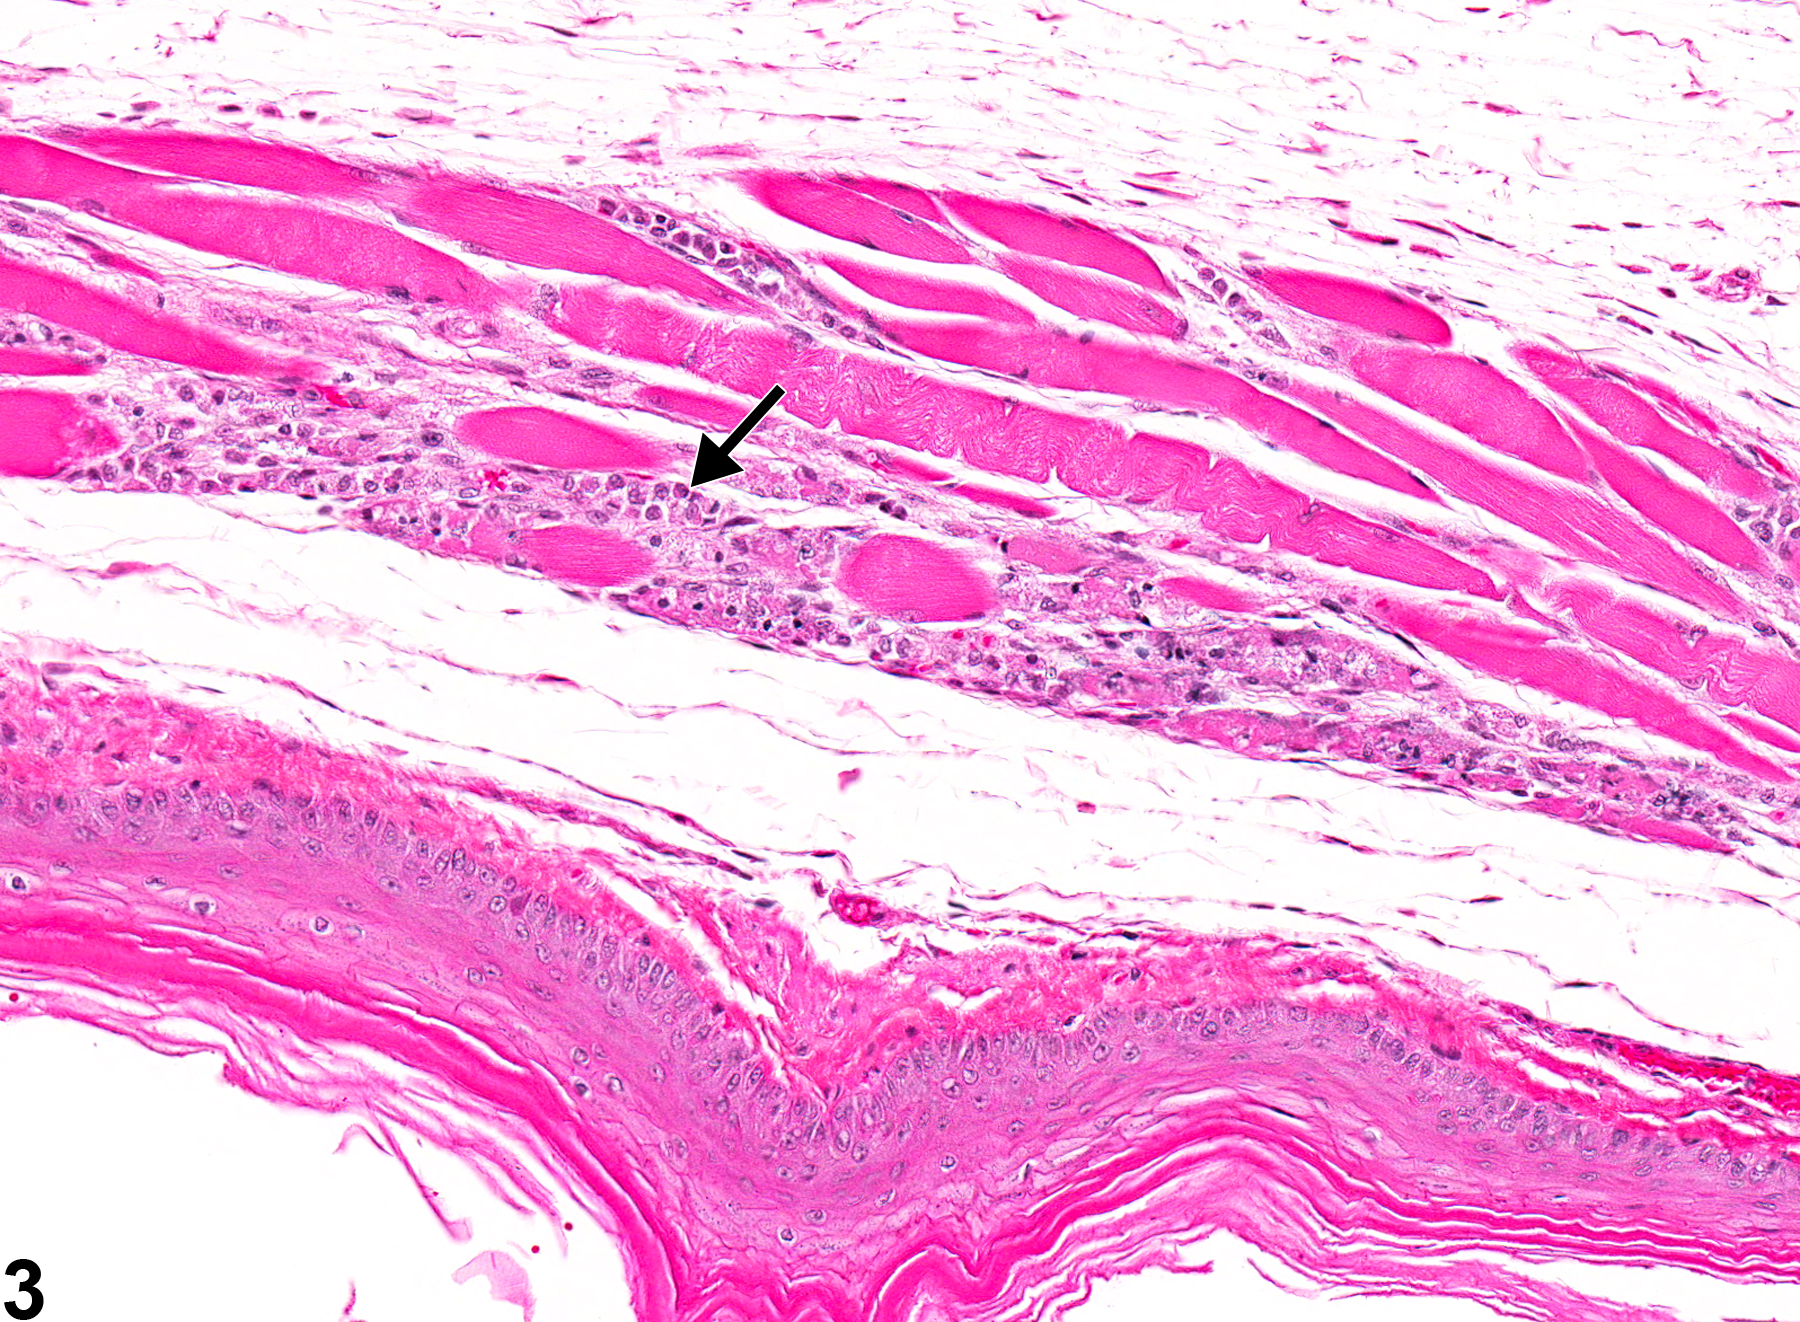 Image of degeneration in the esophagus muscularis from a female Sprague-Dawley rat in a chronic study